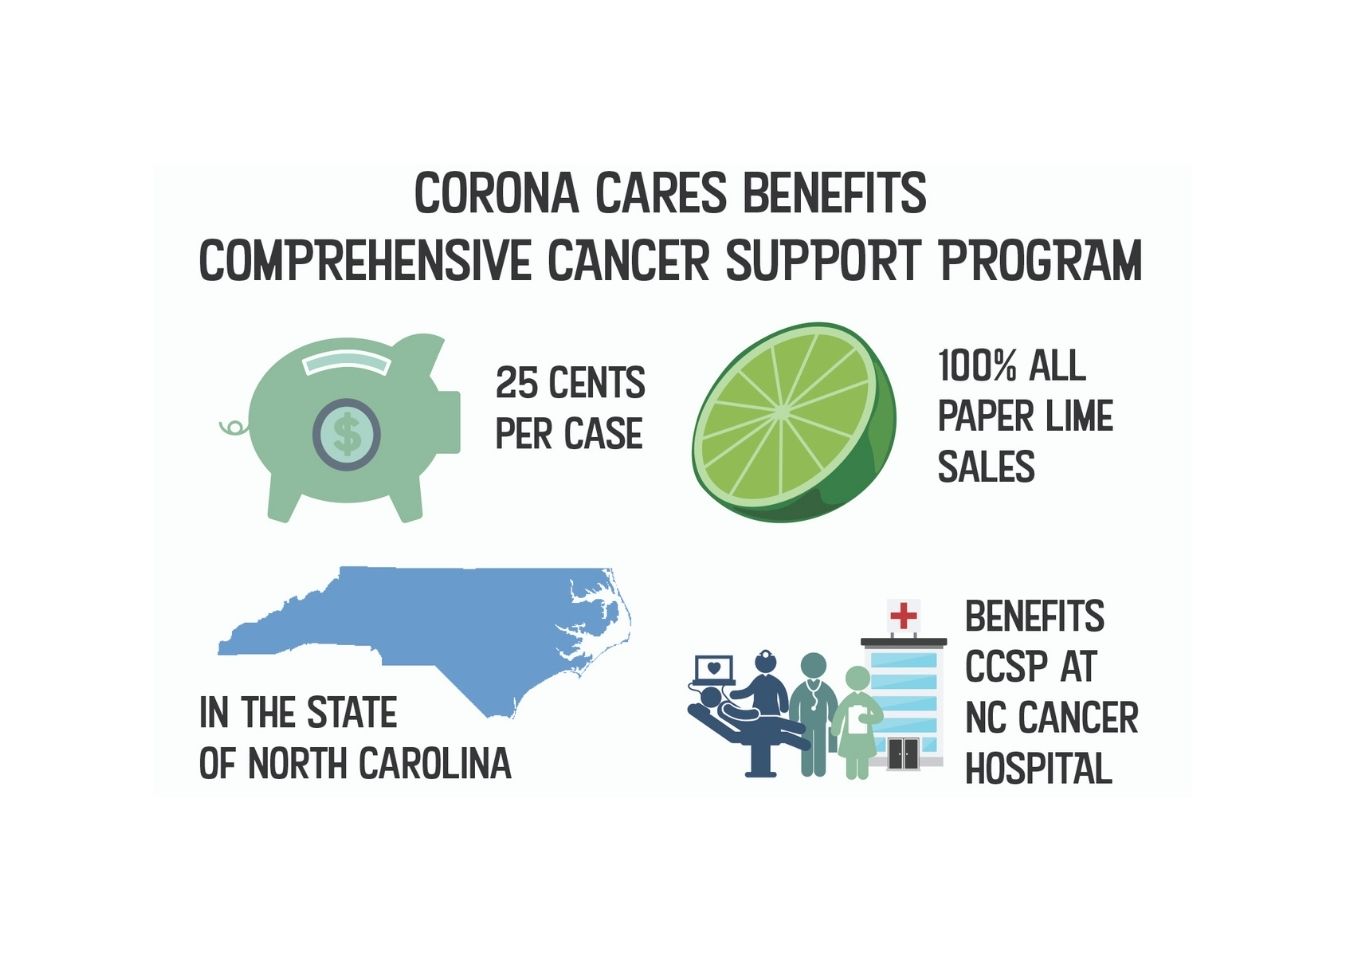 Corona Cares benefits CCSP. 25 cents per case and 100% of paper lime sales in North Carolina benefits the CCSP at the N.C. Cancer Hospital.